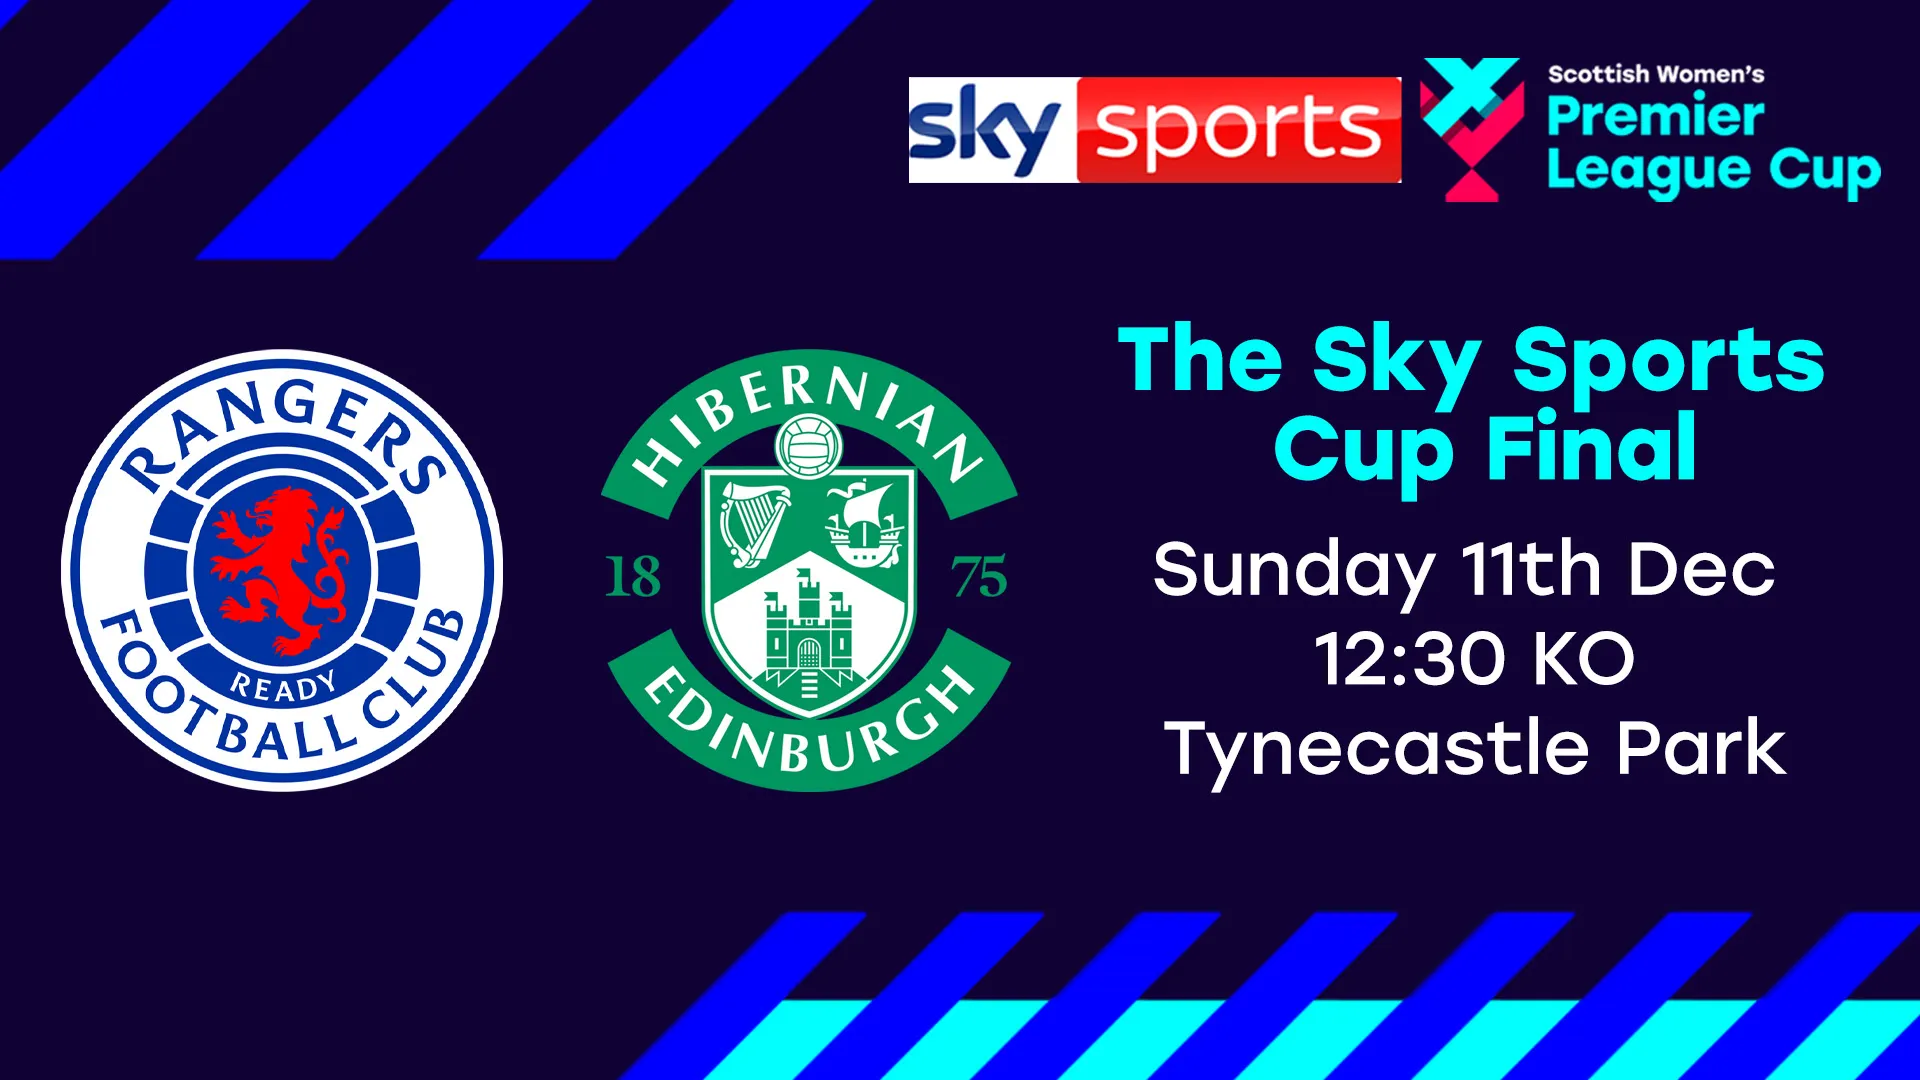 Image for Rangers and Hibernian to meet in the Sky Sports Cup Final